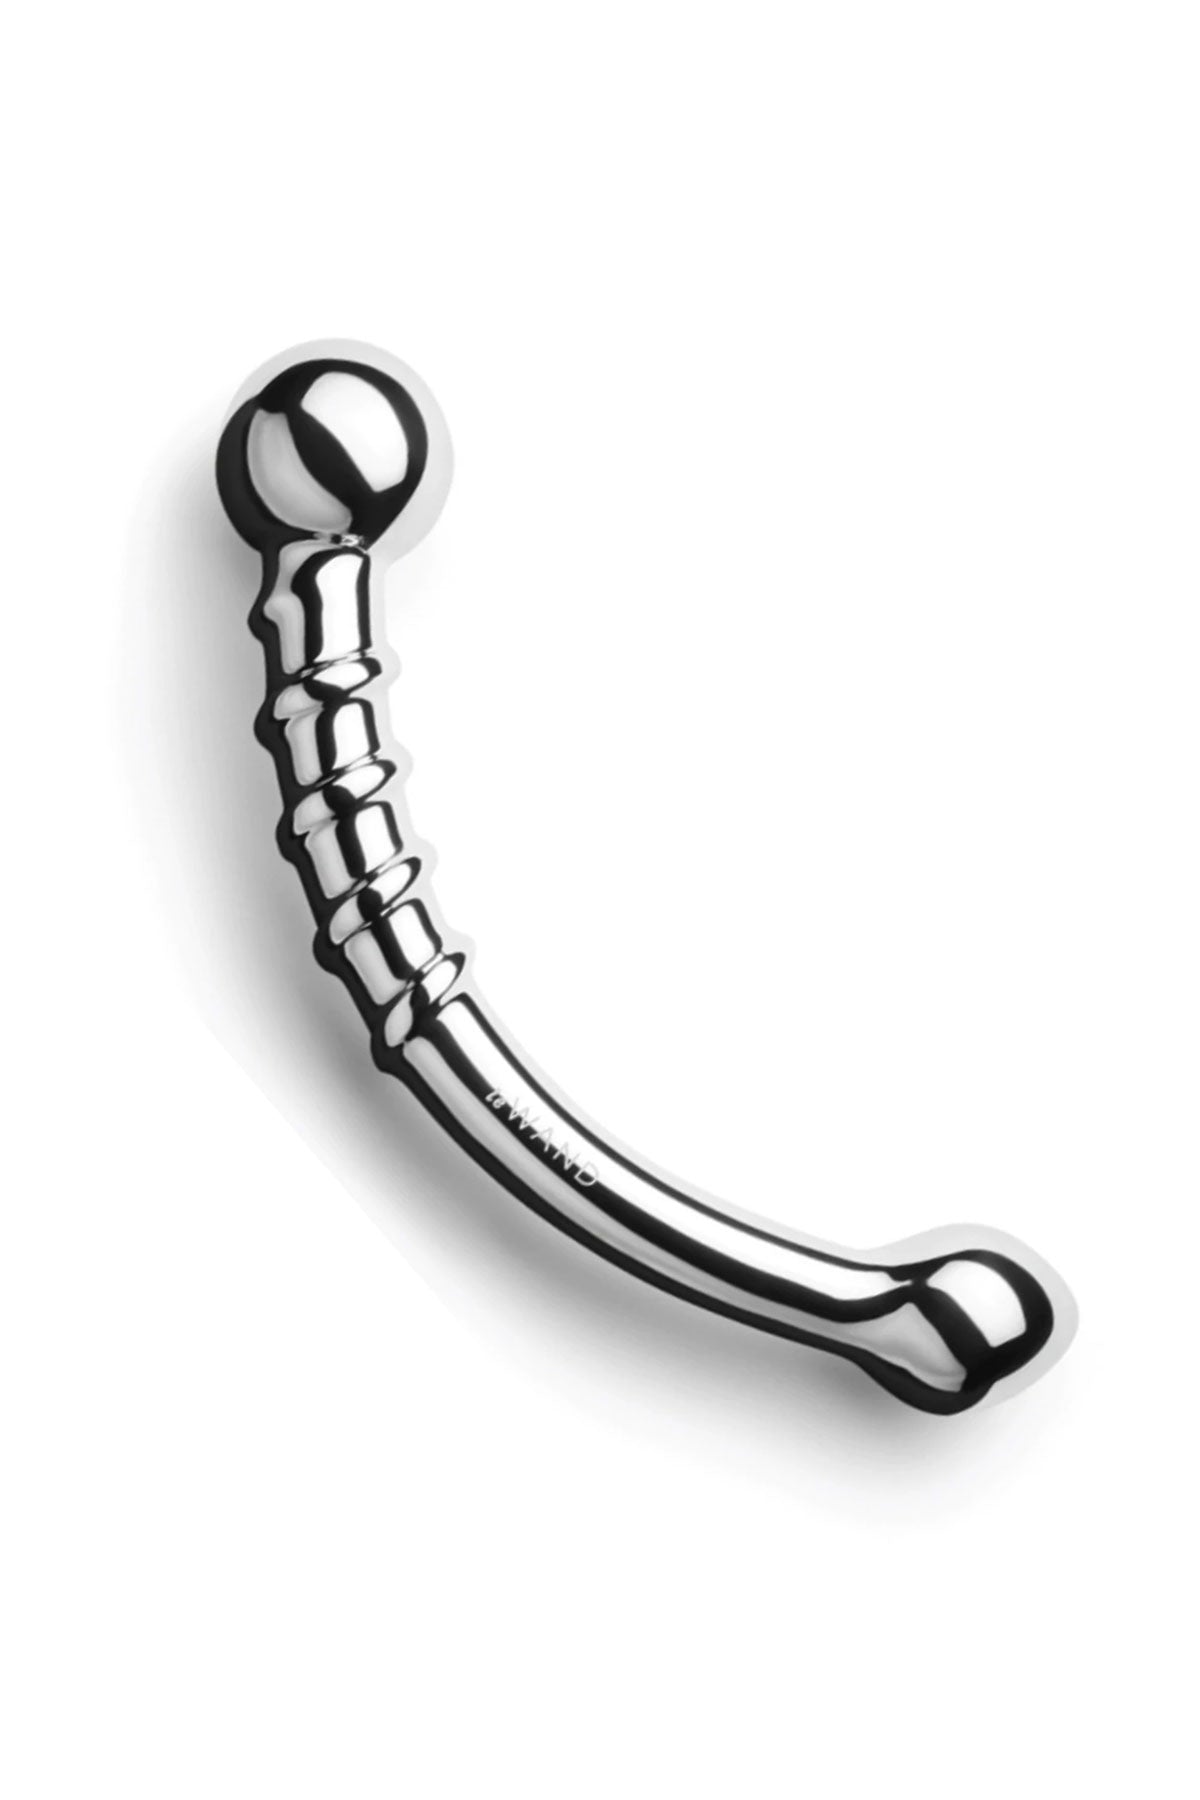 Bow | Stainless Steel Dildo